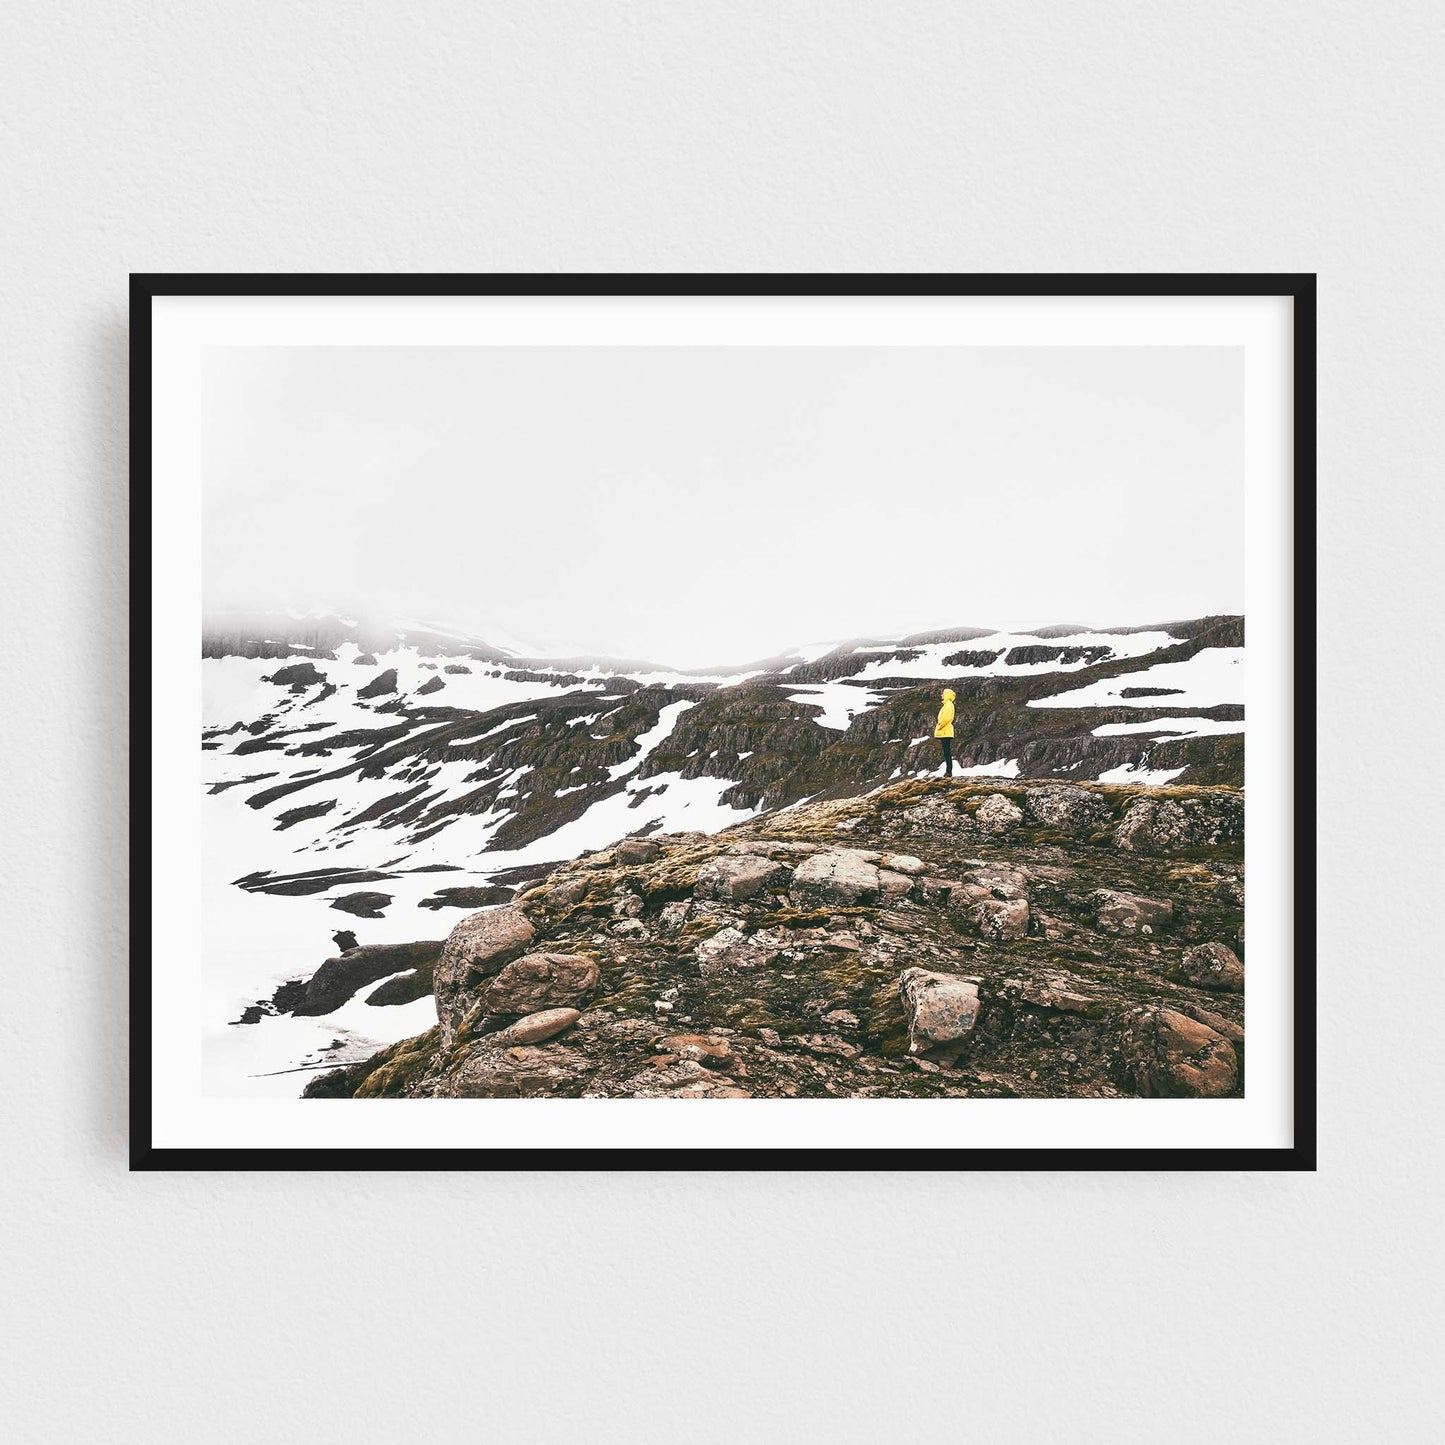 Iceland fine art photography print featuring a lonely hiker in the mountains in winter